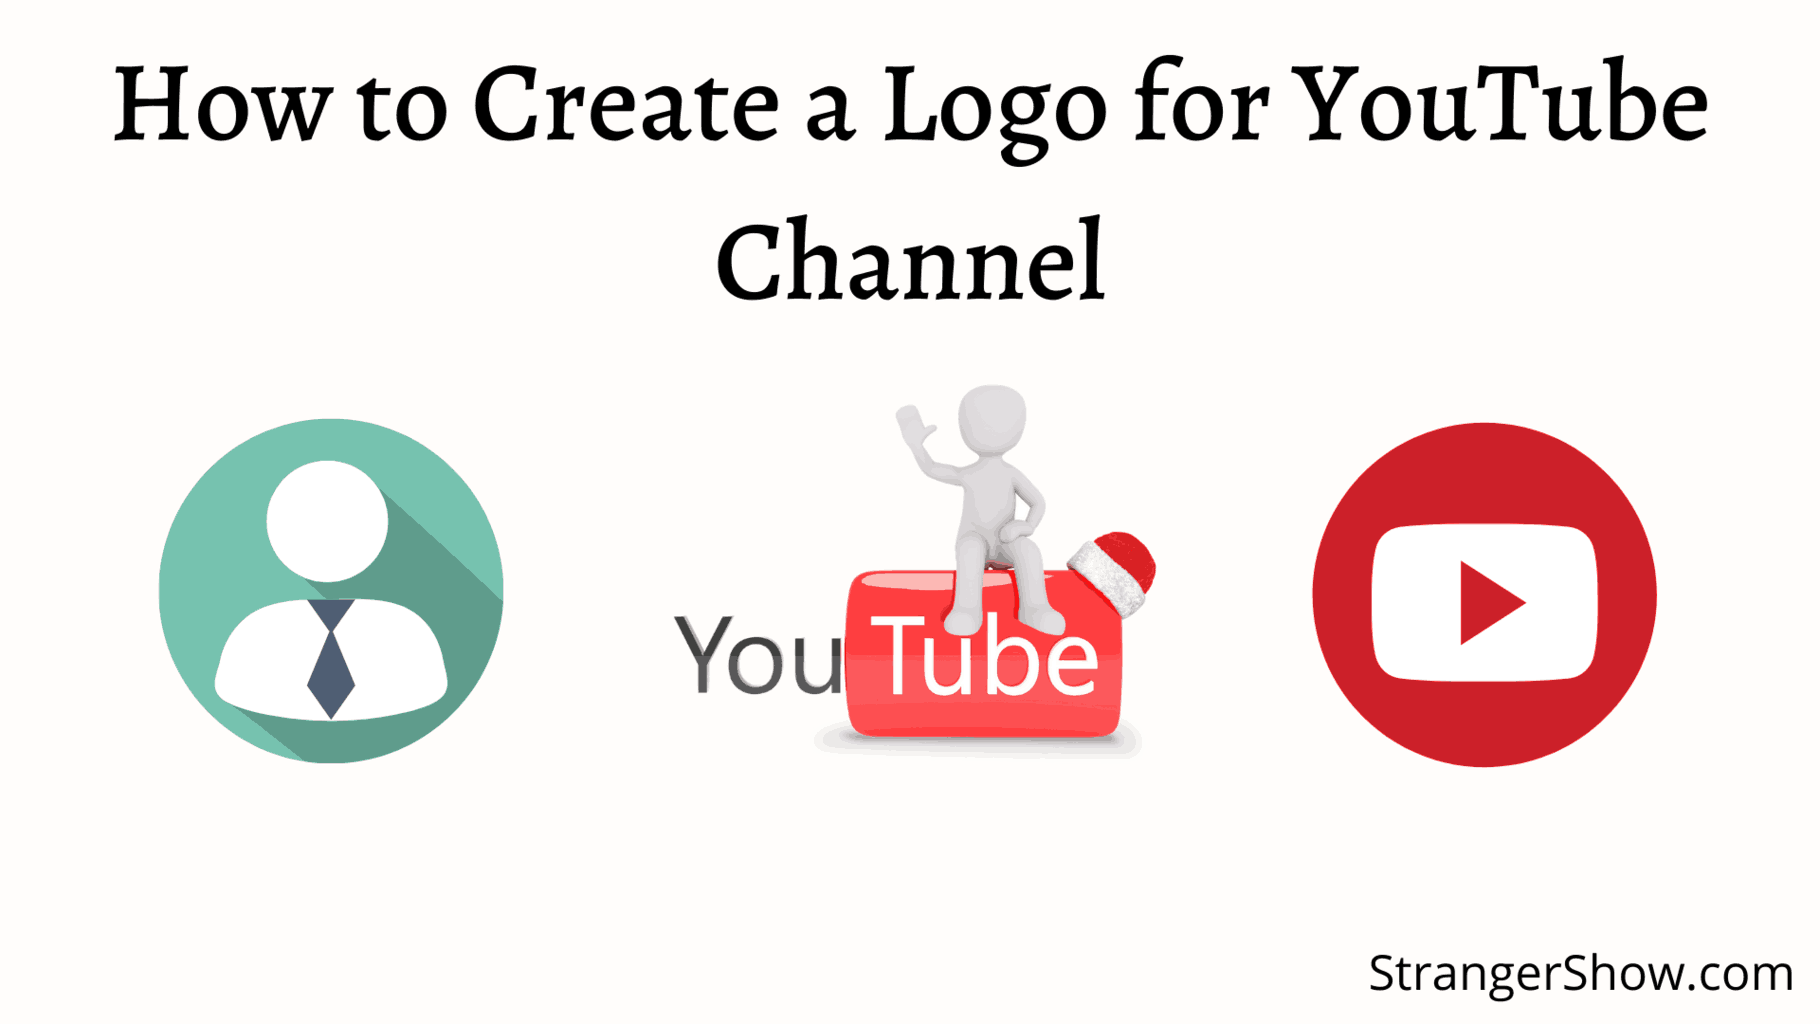 How to Create a Logo for YouTube channel